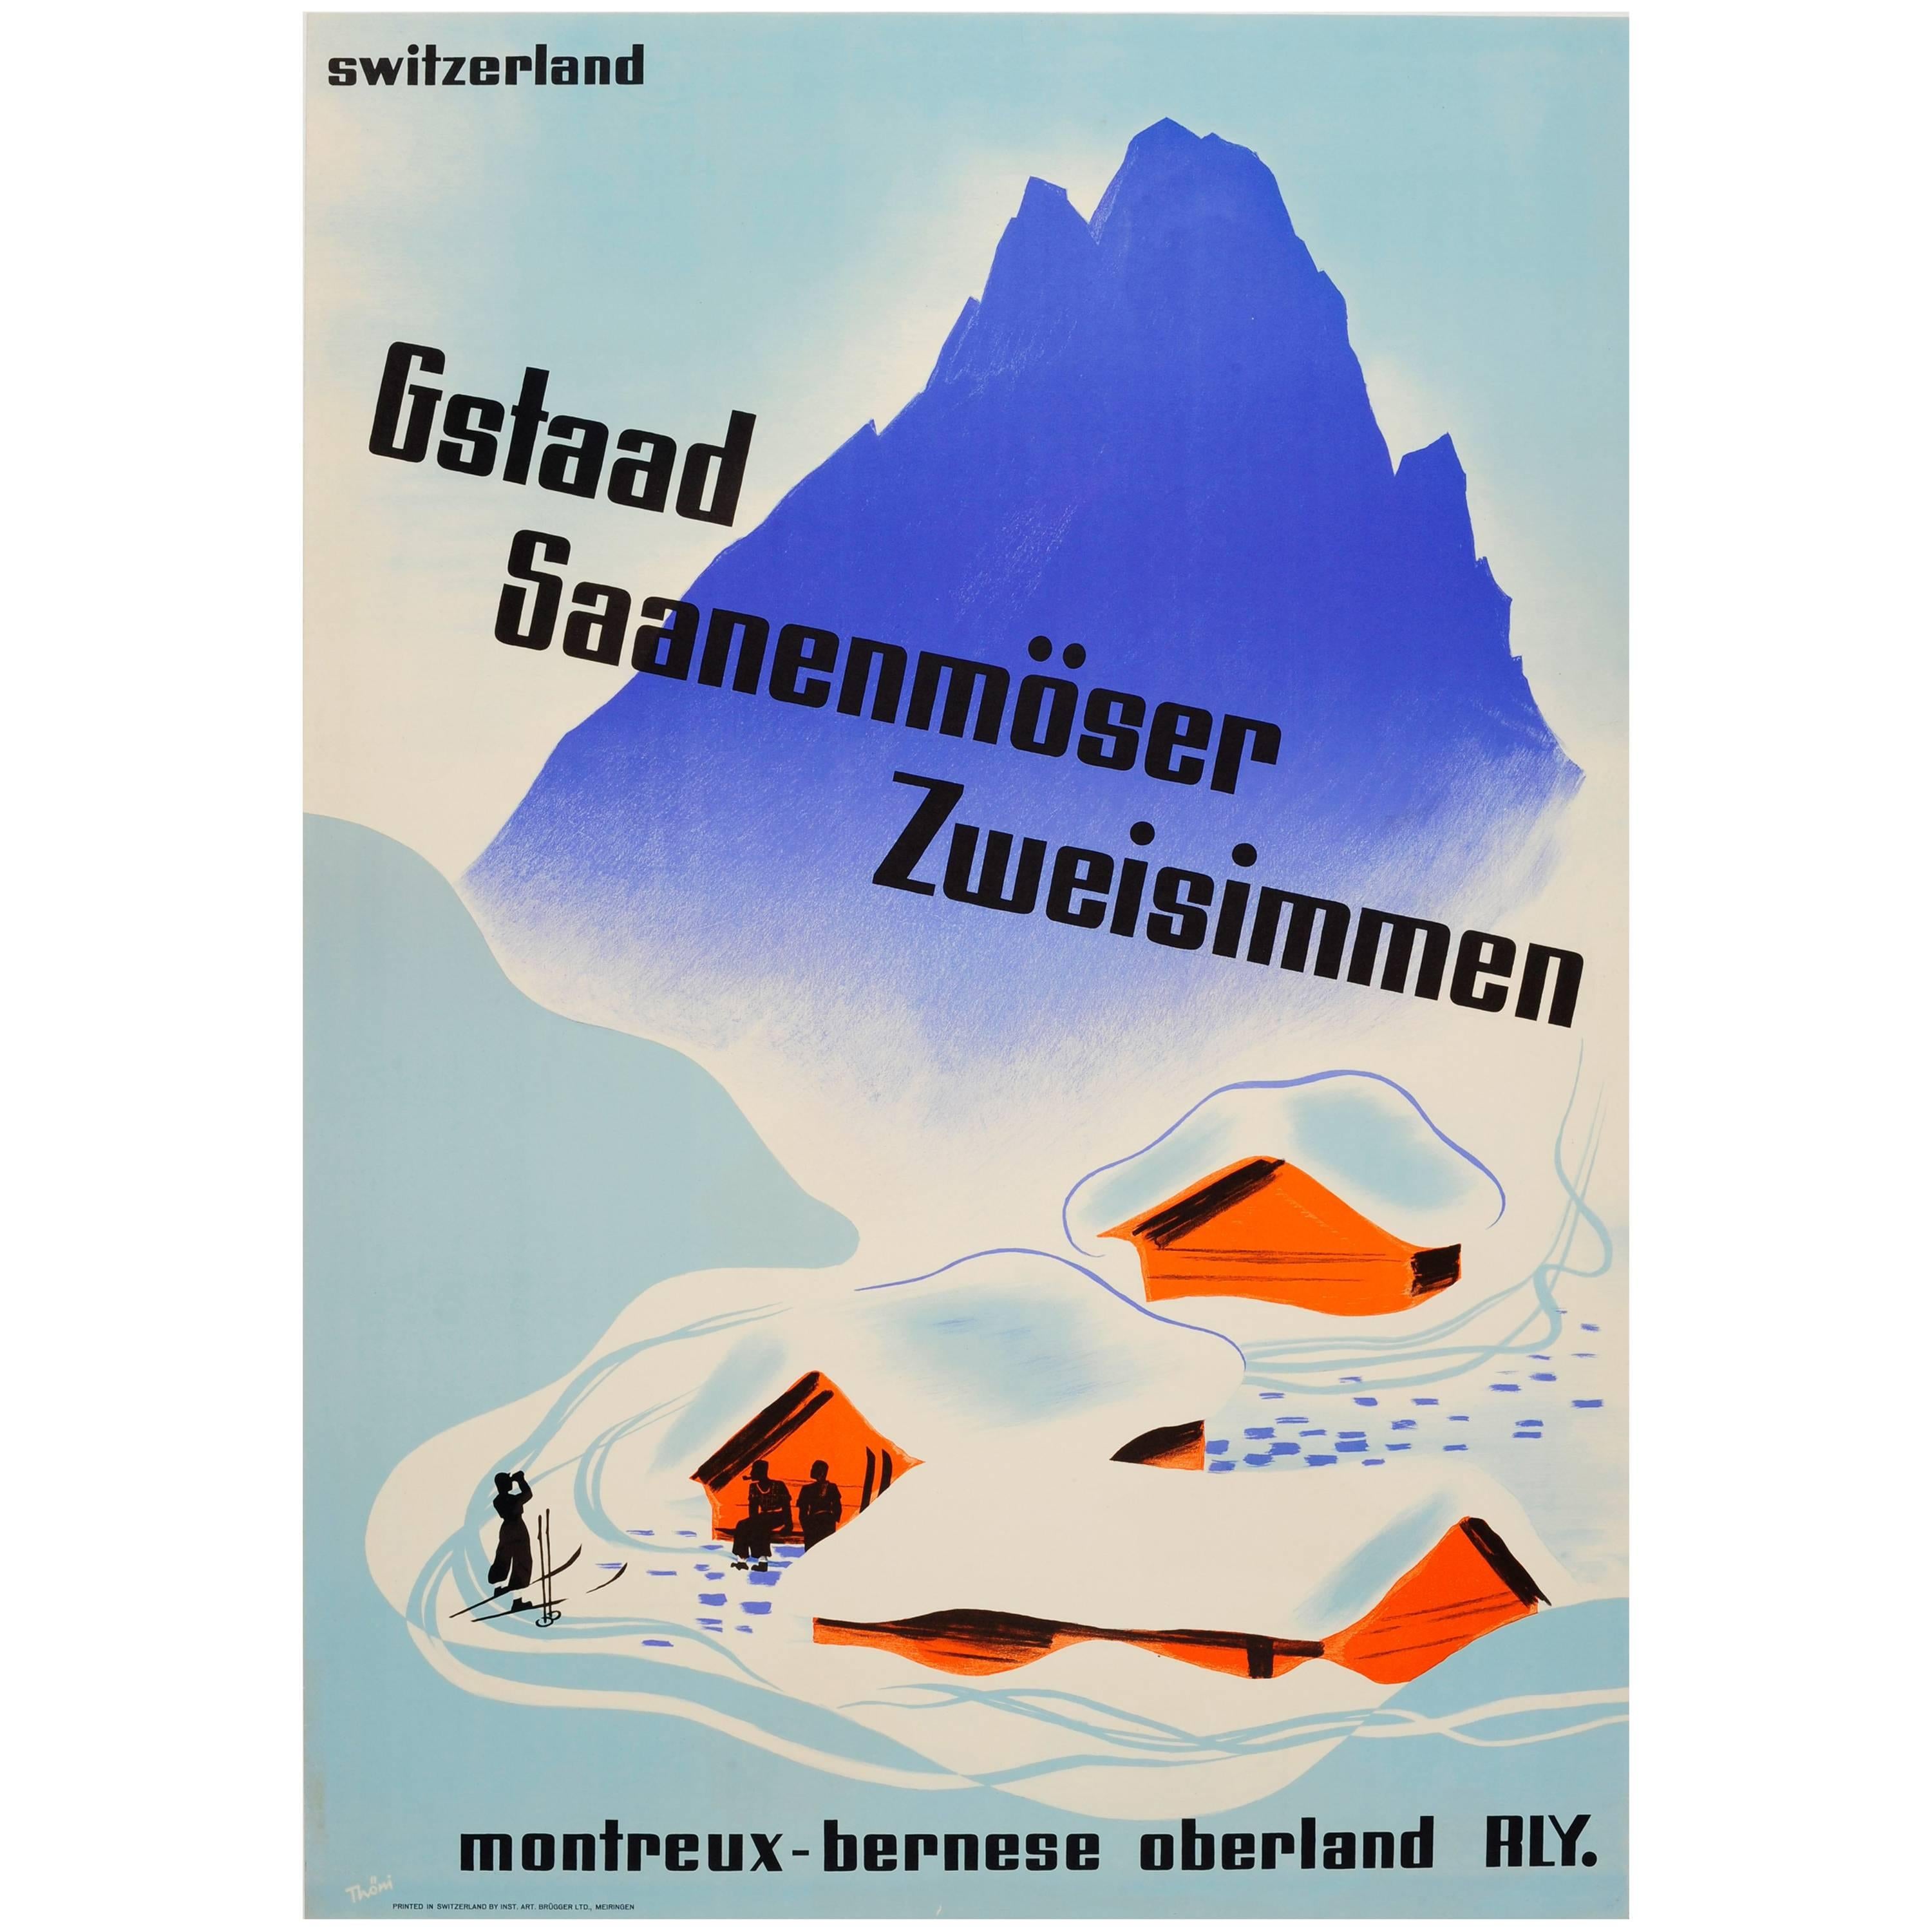 Original Vintage MOB Swiss Railway Winter Sport and Skiing Poster for Gstaad